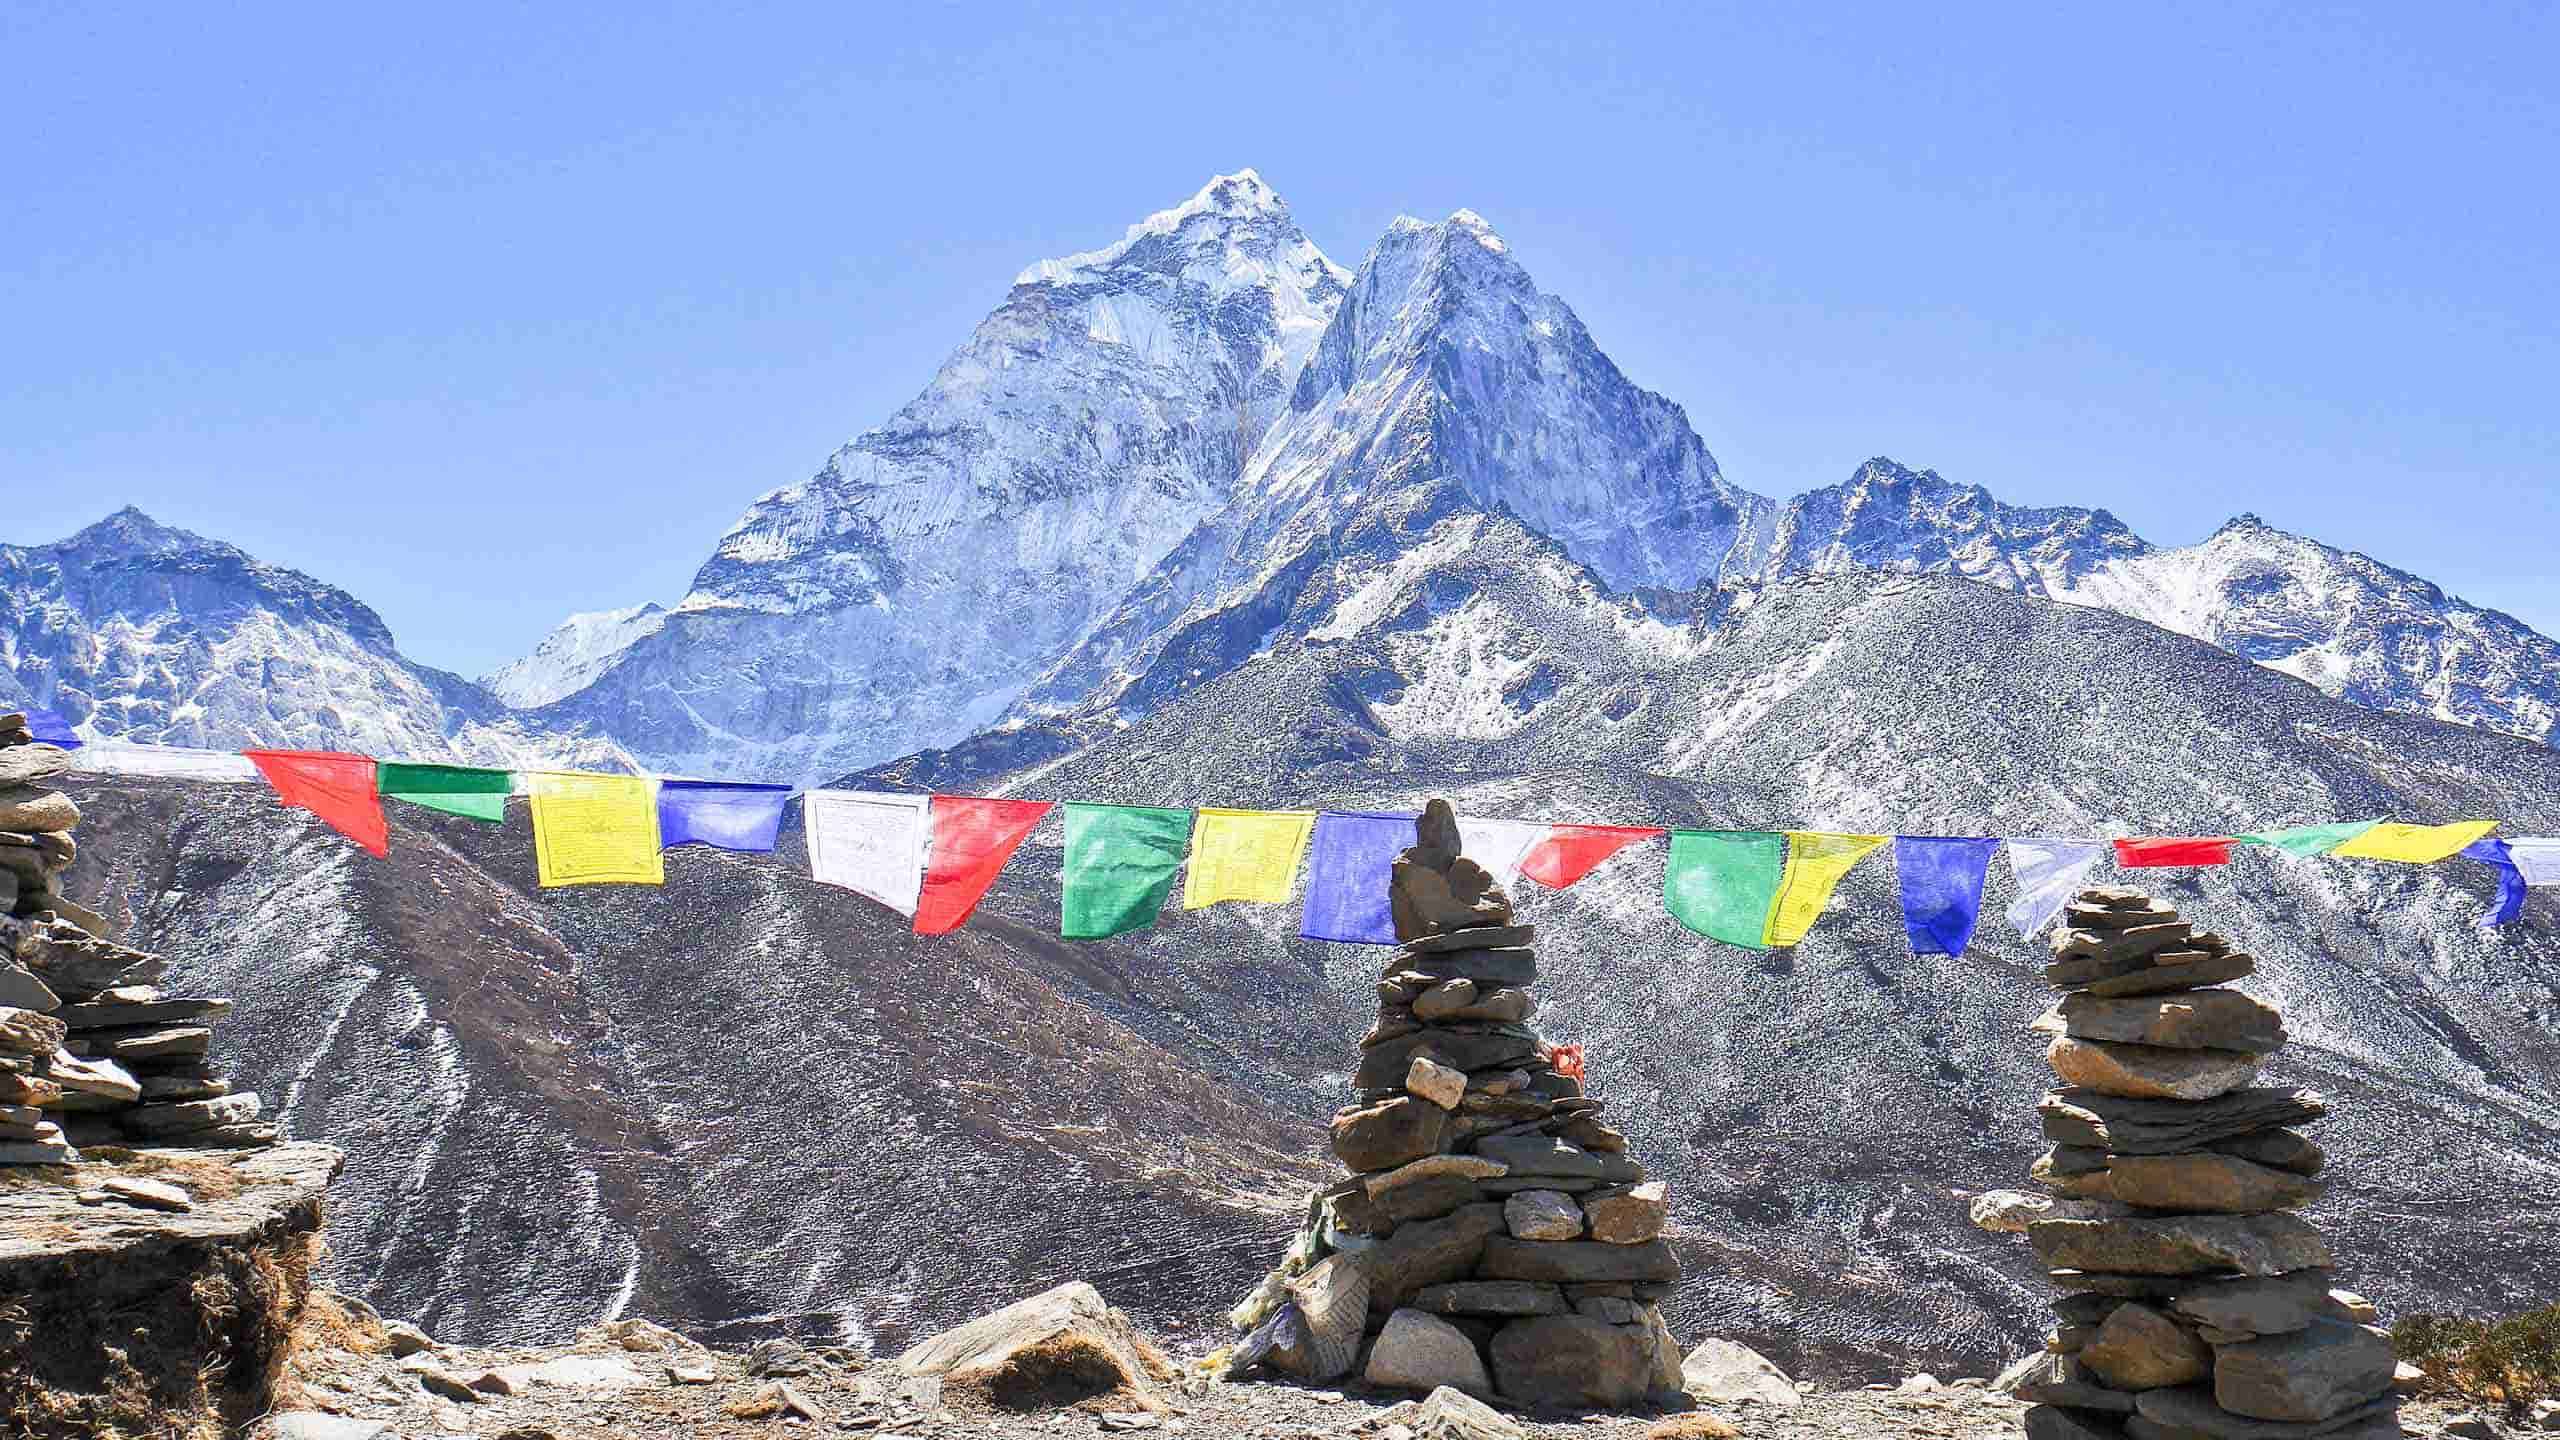 Mount Everest Lodge To Lodge Base Camp Trek 16D15N, Guided